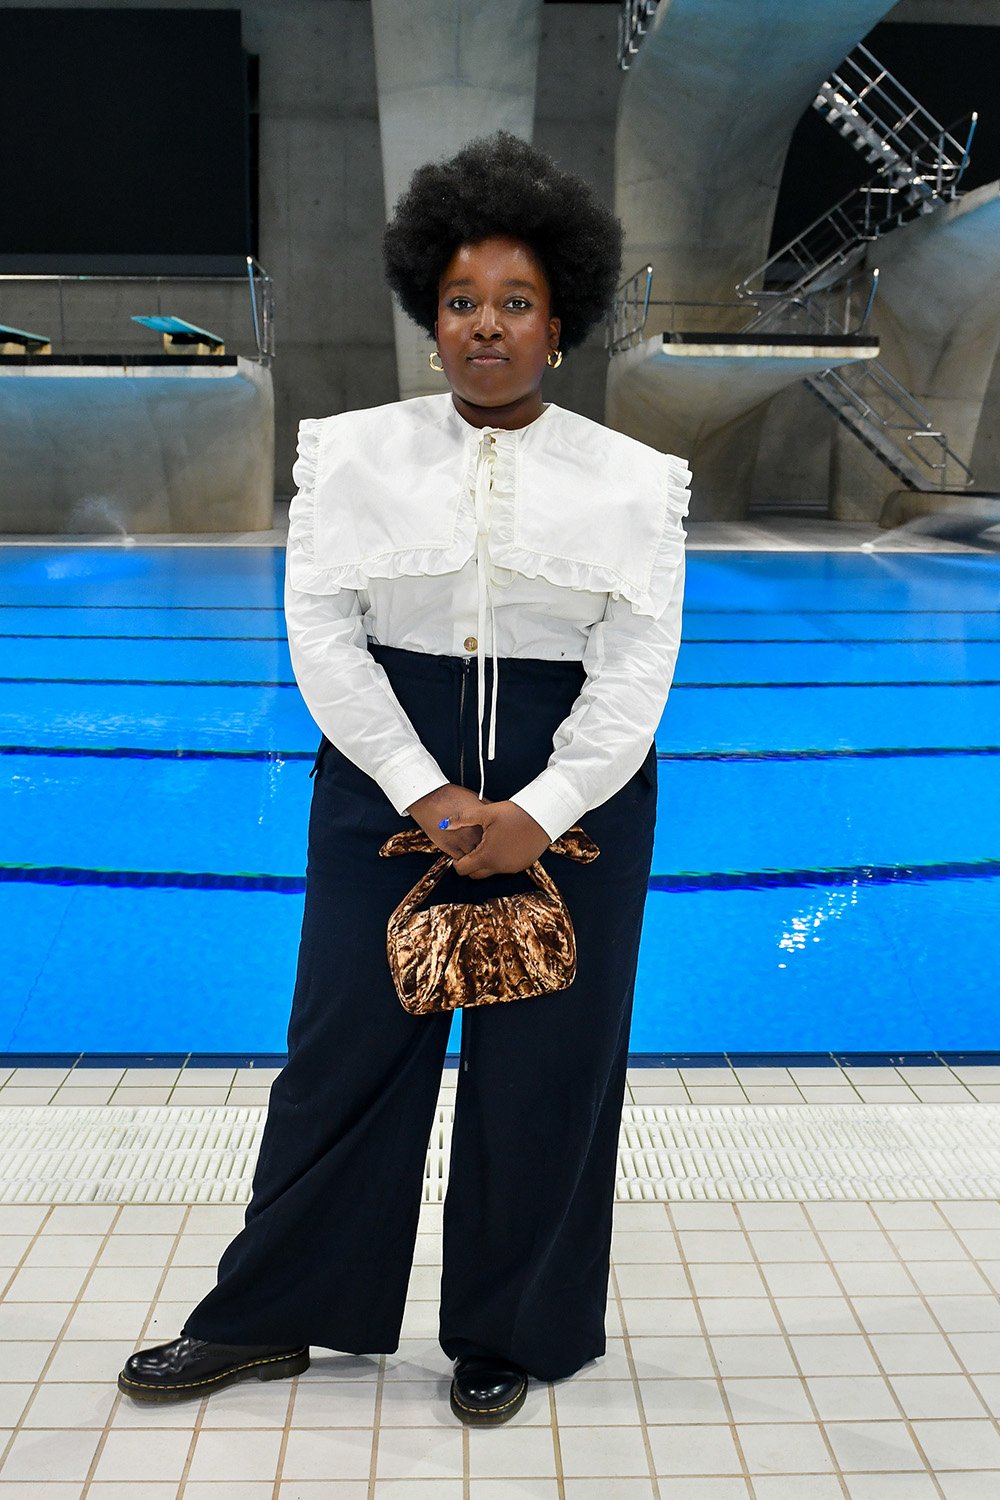 Lolly Adefope attends the Rejina Pyo SS22 show during London Fashion Week September 2021 at the London Aquatics Centre on September 19, 2021 in London, England. (Photo: David M. Benett/Dave Benett/Getty Images)